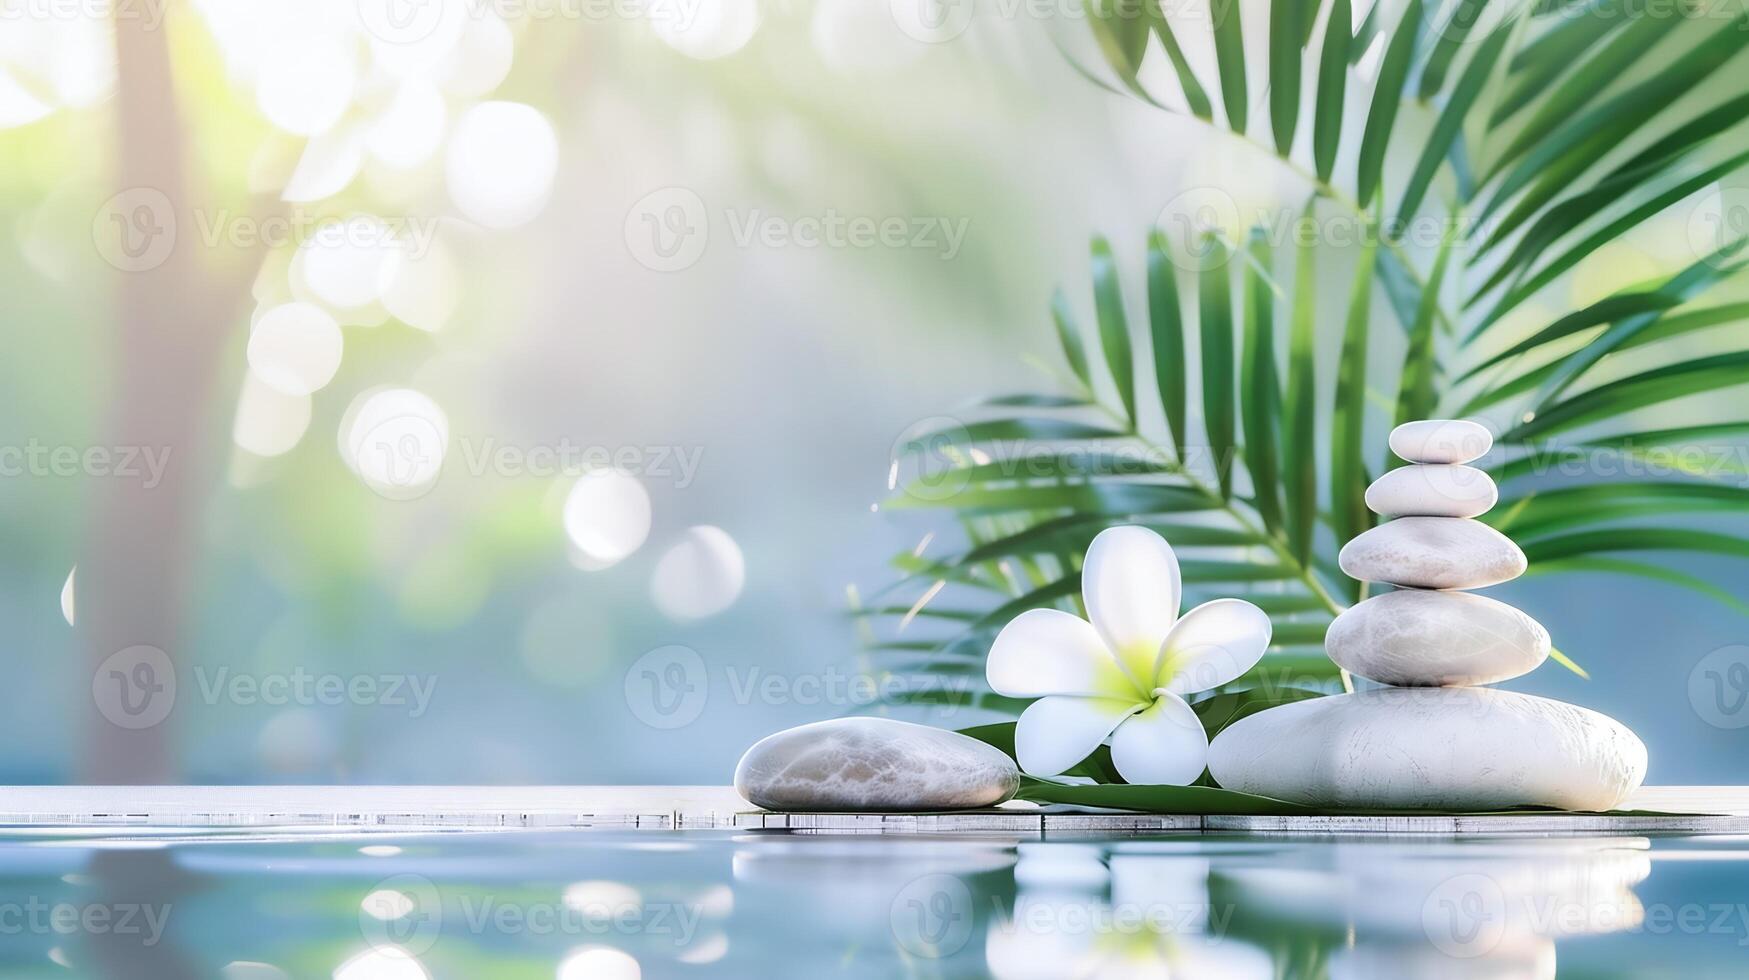 Spa setting with stacked stones and frangipani flower, serene water and palm leaves, zen wellness atmosphere photo